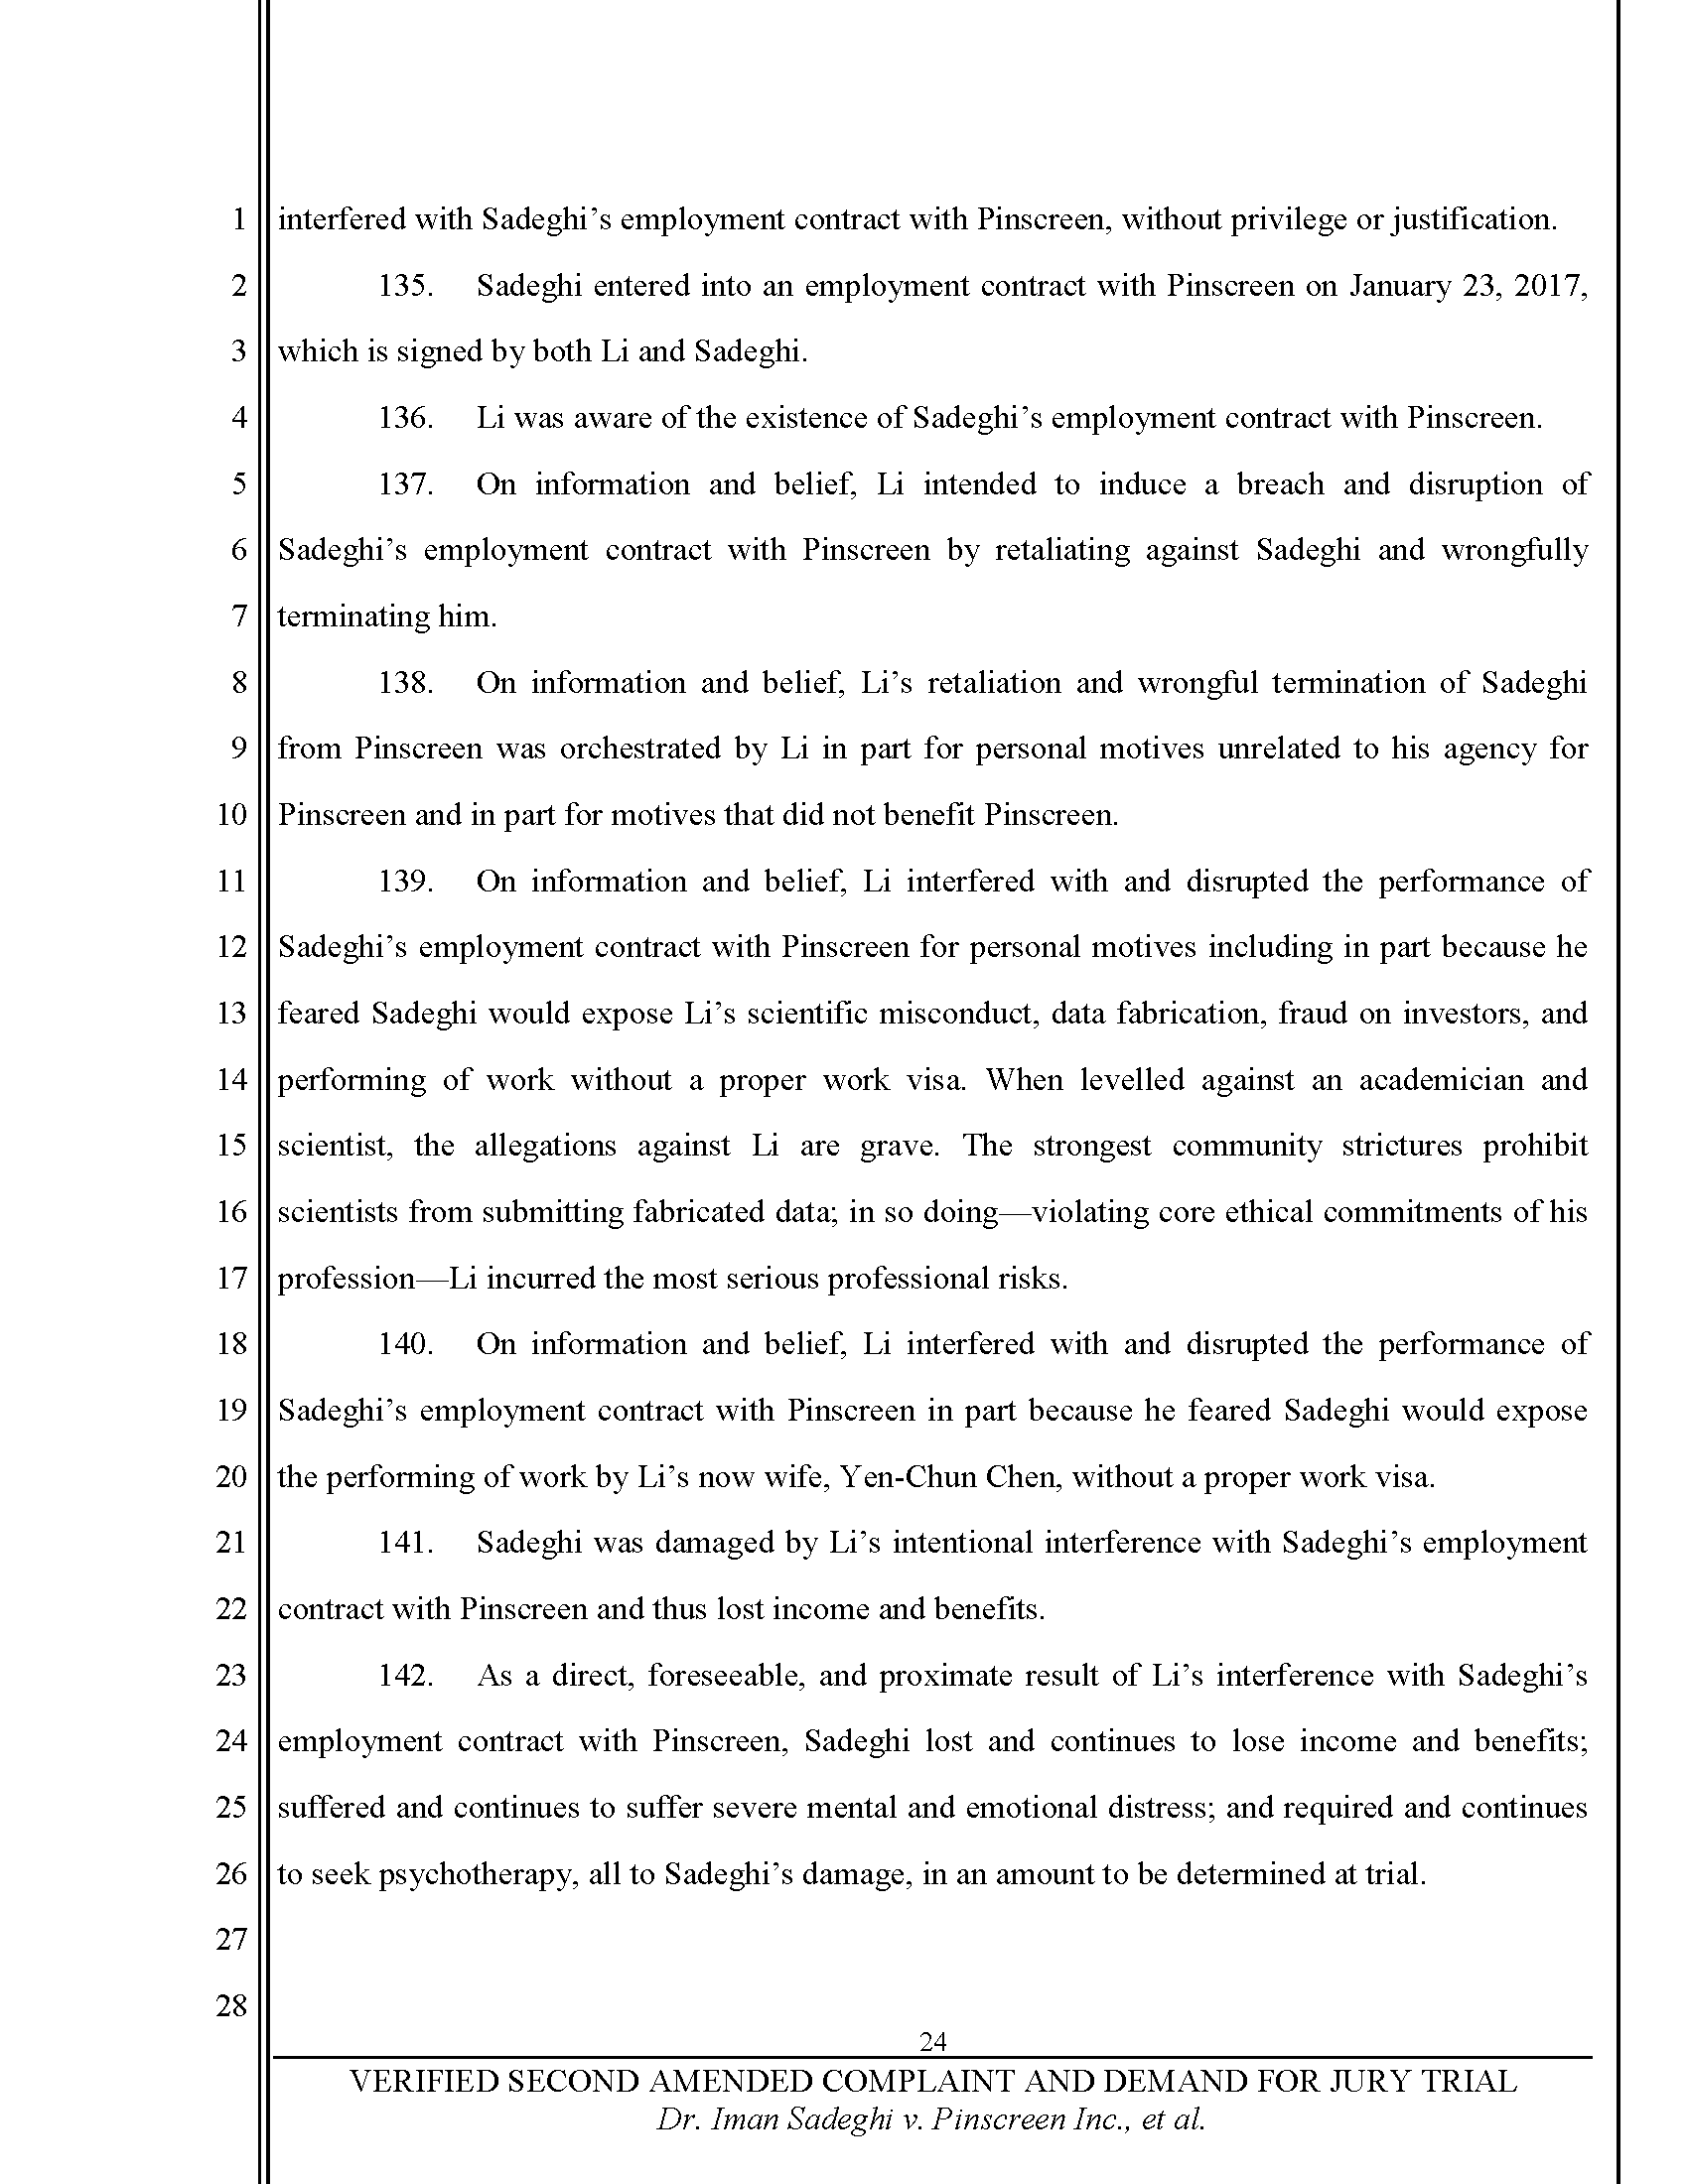 Second Amended Complaint (SAC) Page 25